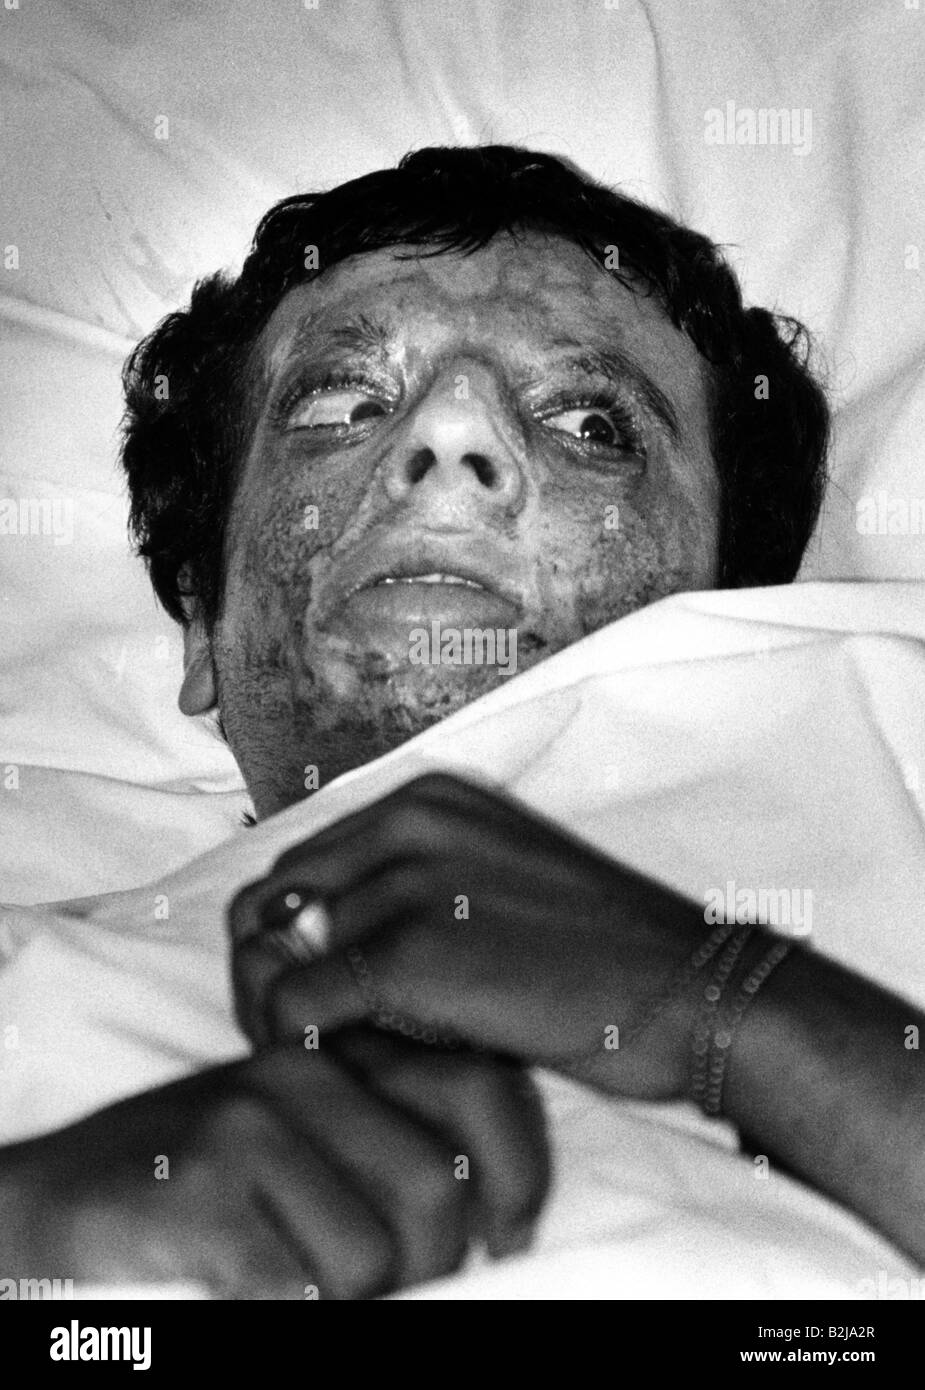 events, Iran-Iraq War 1980 - 1988, by poisen gas wounded man in a hospital, Irak, circa 1985, victims, chemical warfare, medical service, Iran, 20th century, historic, historical, people, 1980s, Stock Photo